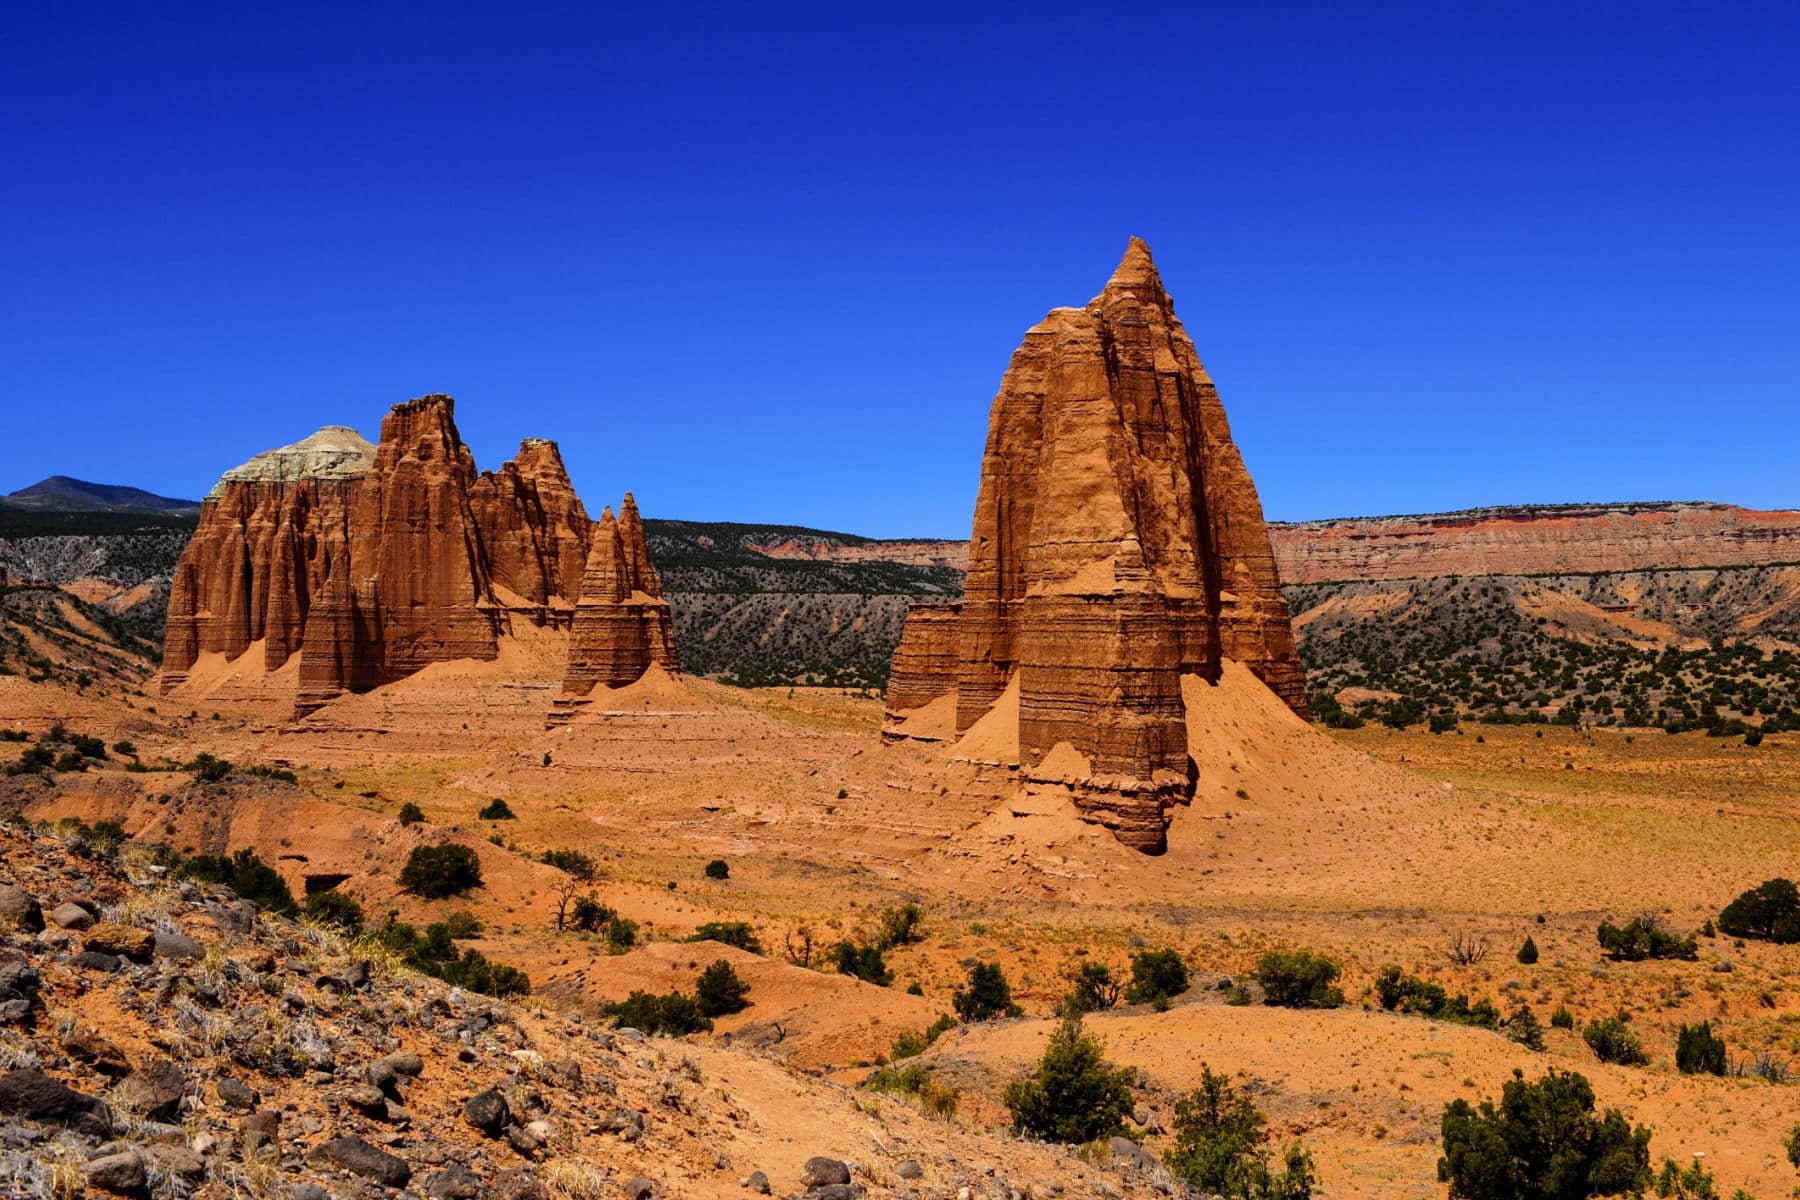 Capitol Reef National Park Facts